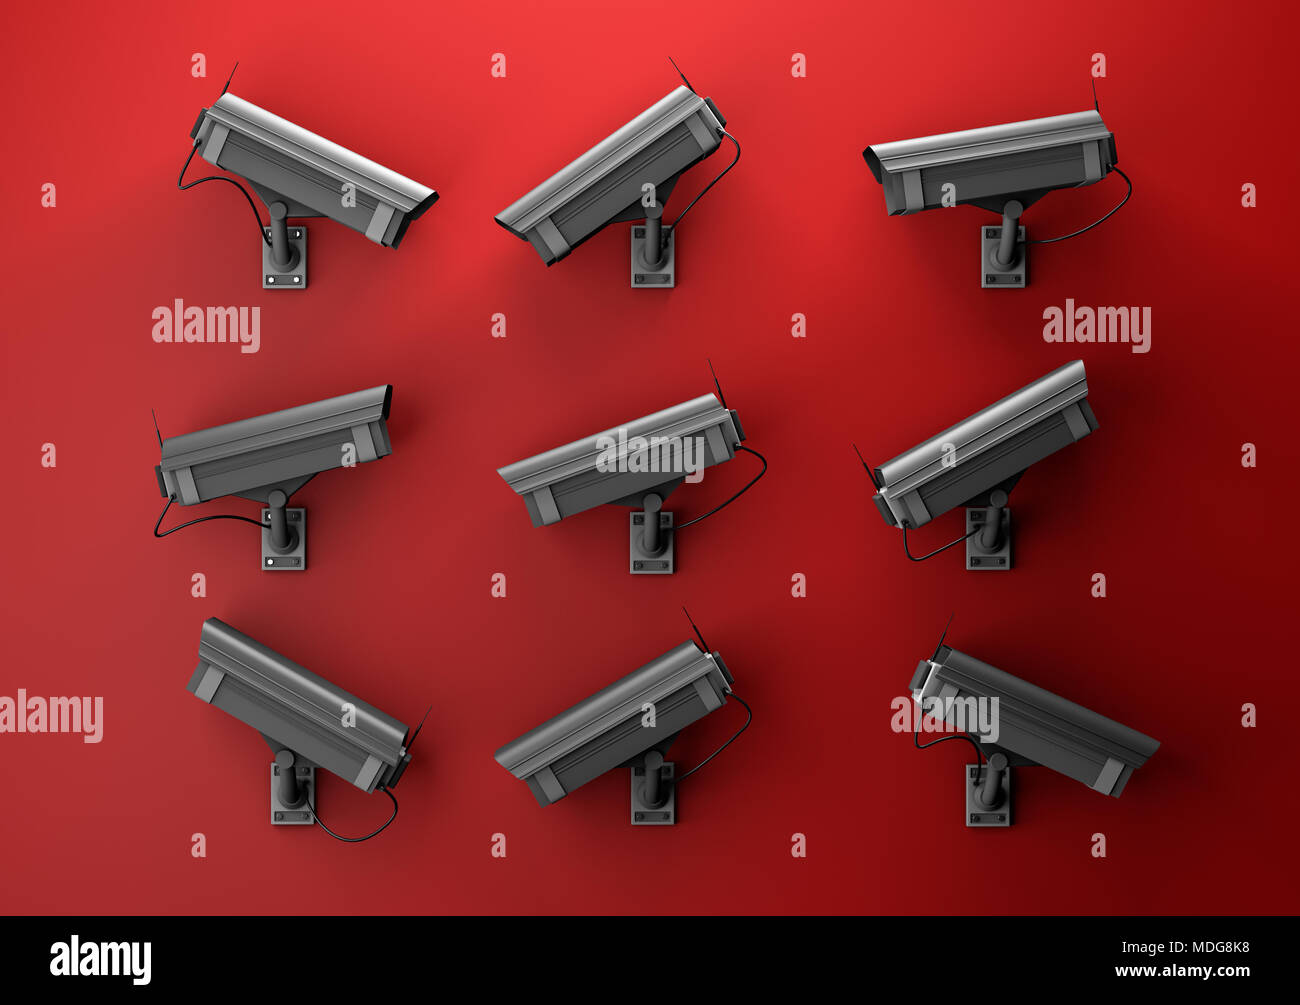 3d illustration of data protection technology privacy concept with many surveillance cameras on a red wall pointing in different directions Stock Photo